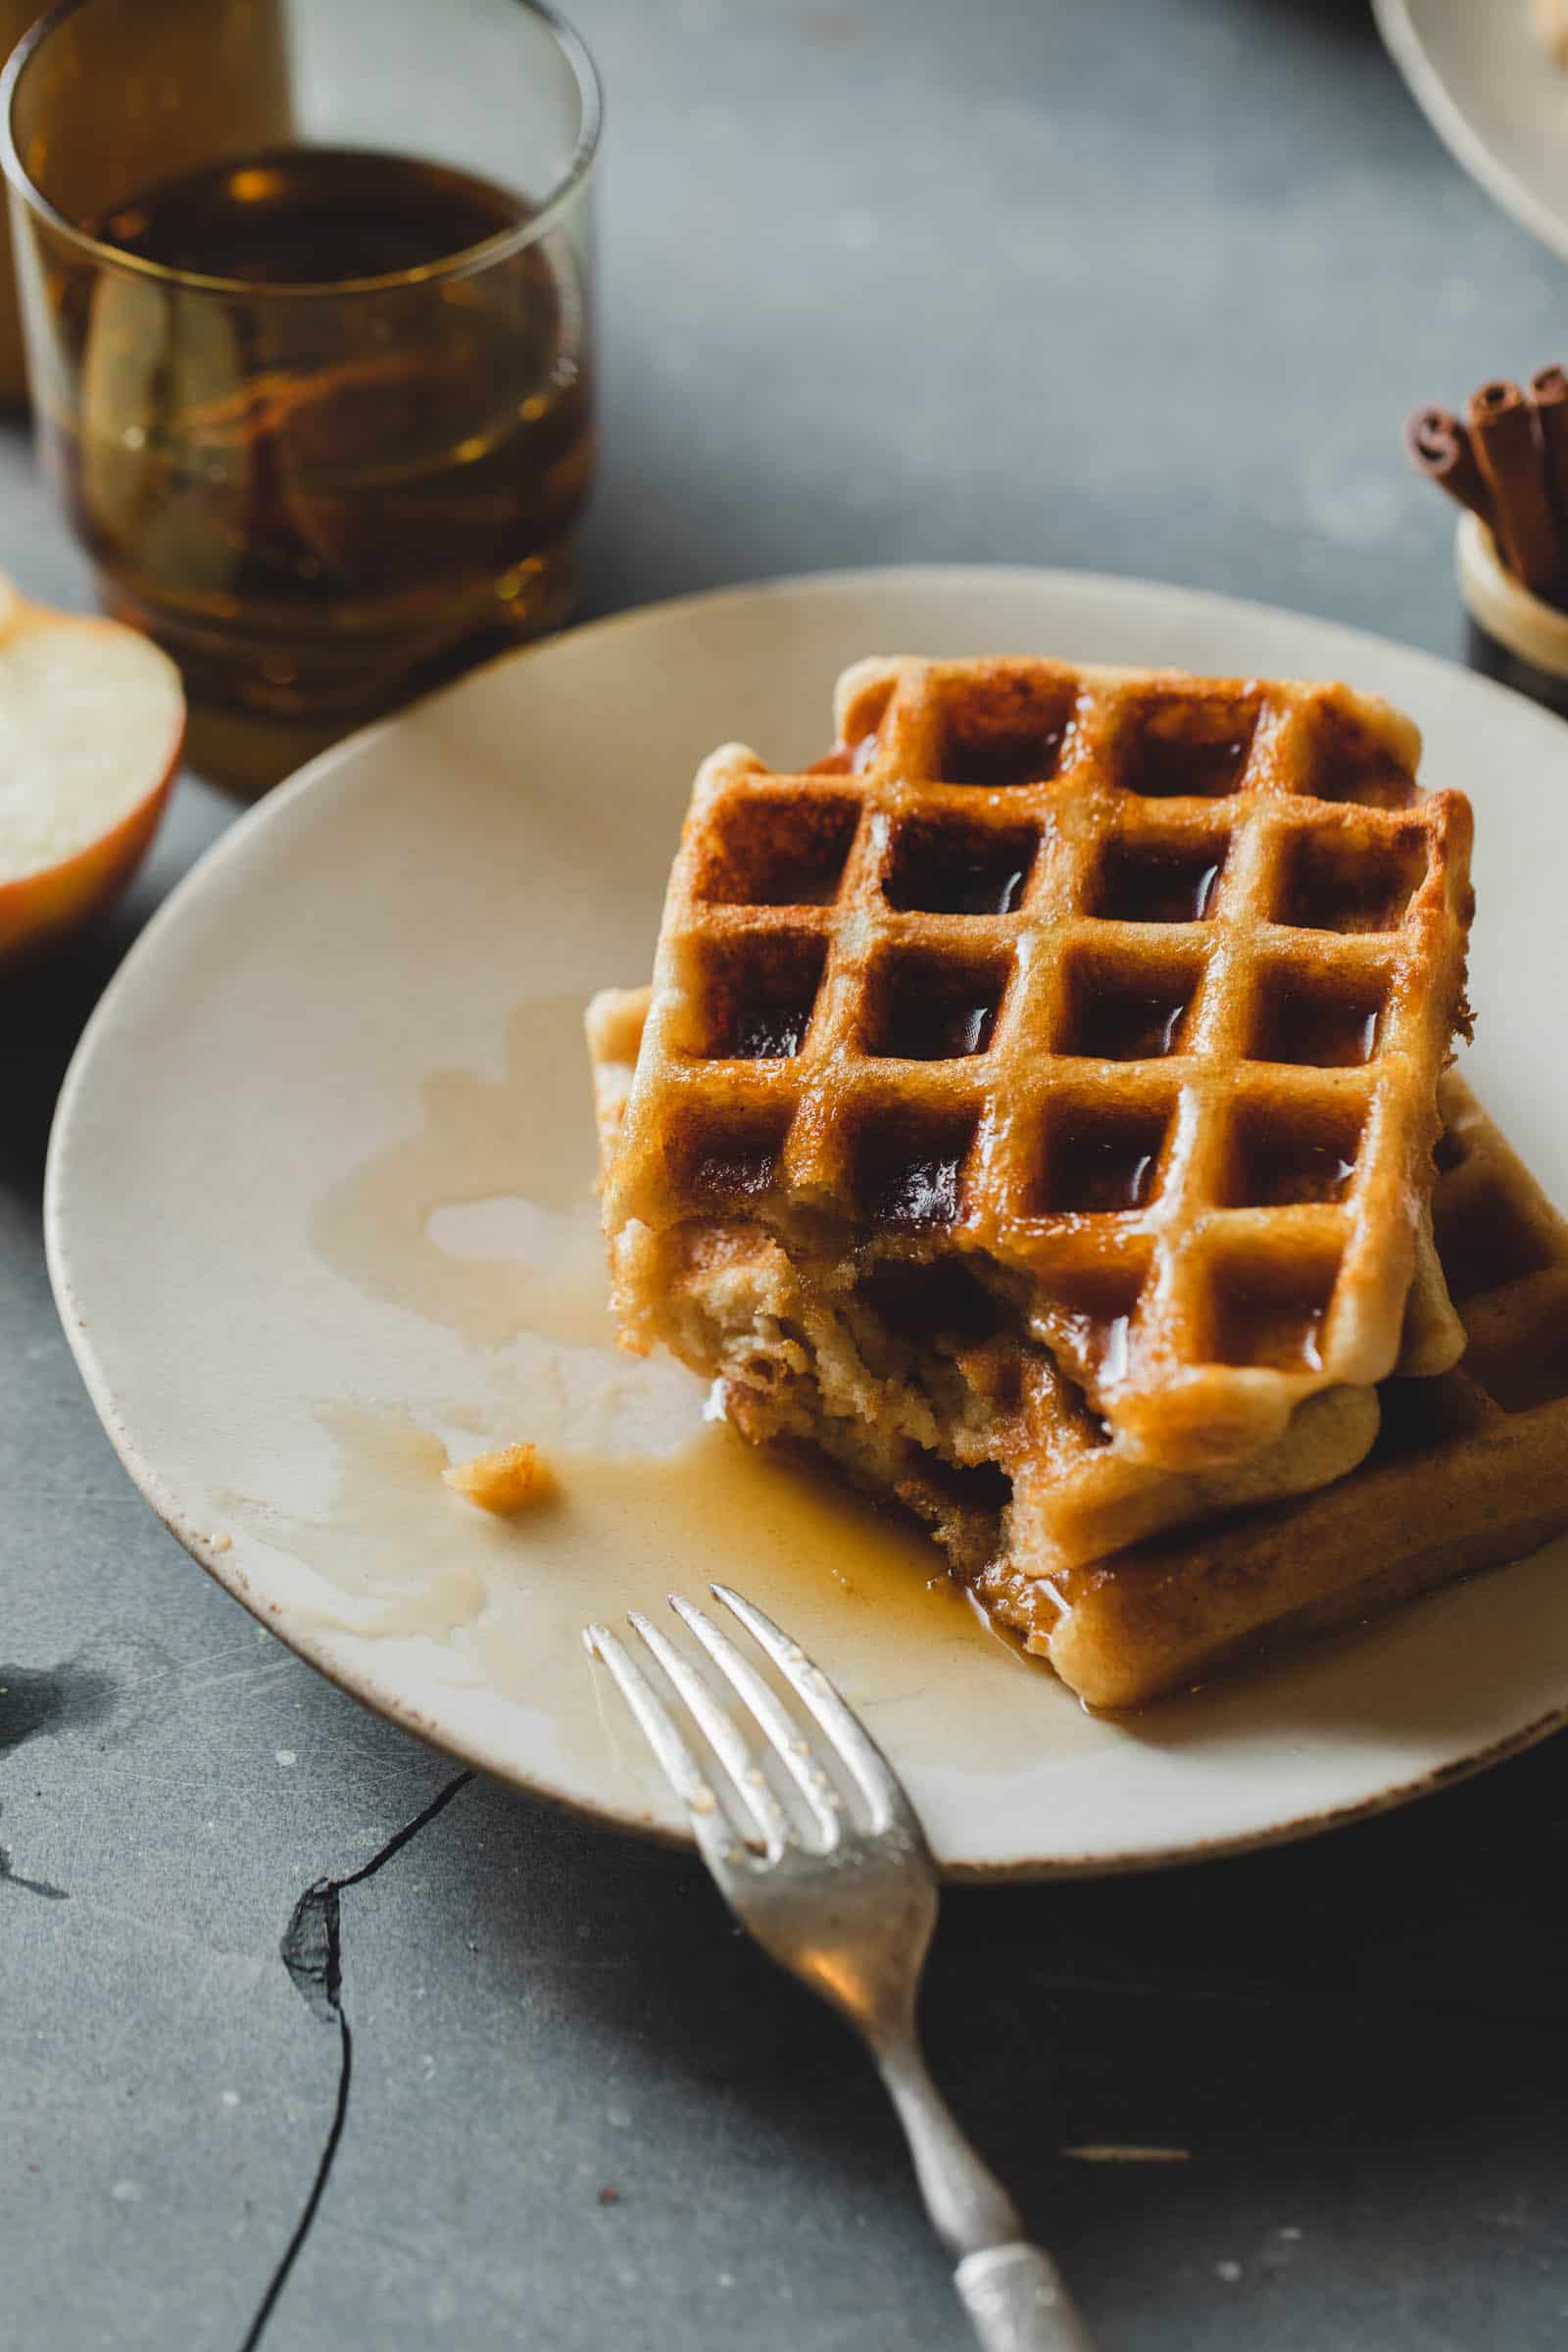 Platter of crispy vegan waffle recipe on plates with maple syrup and a giant bite taken out.